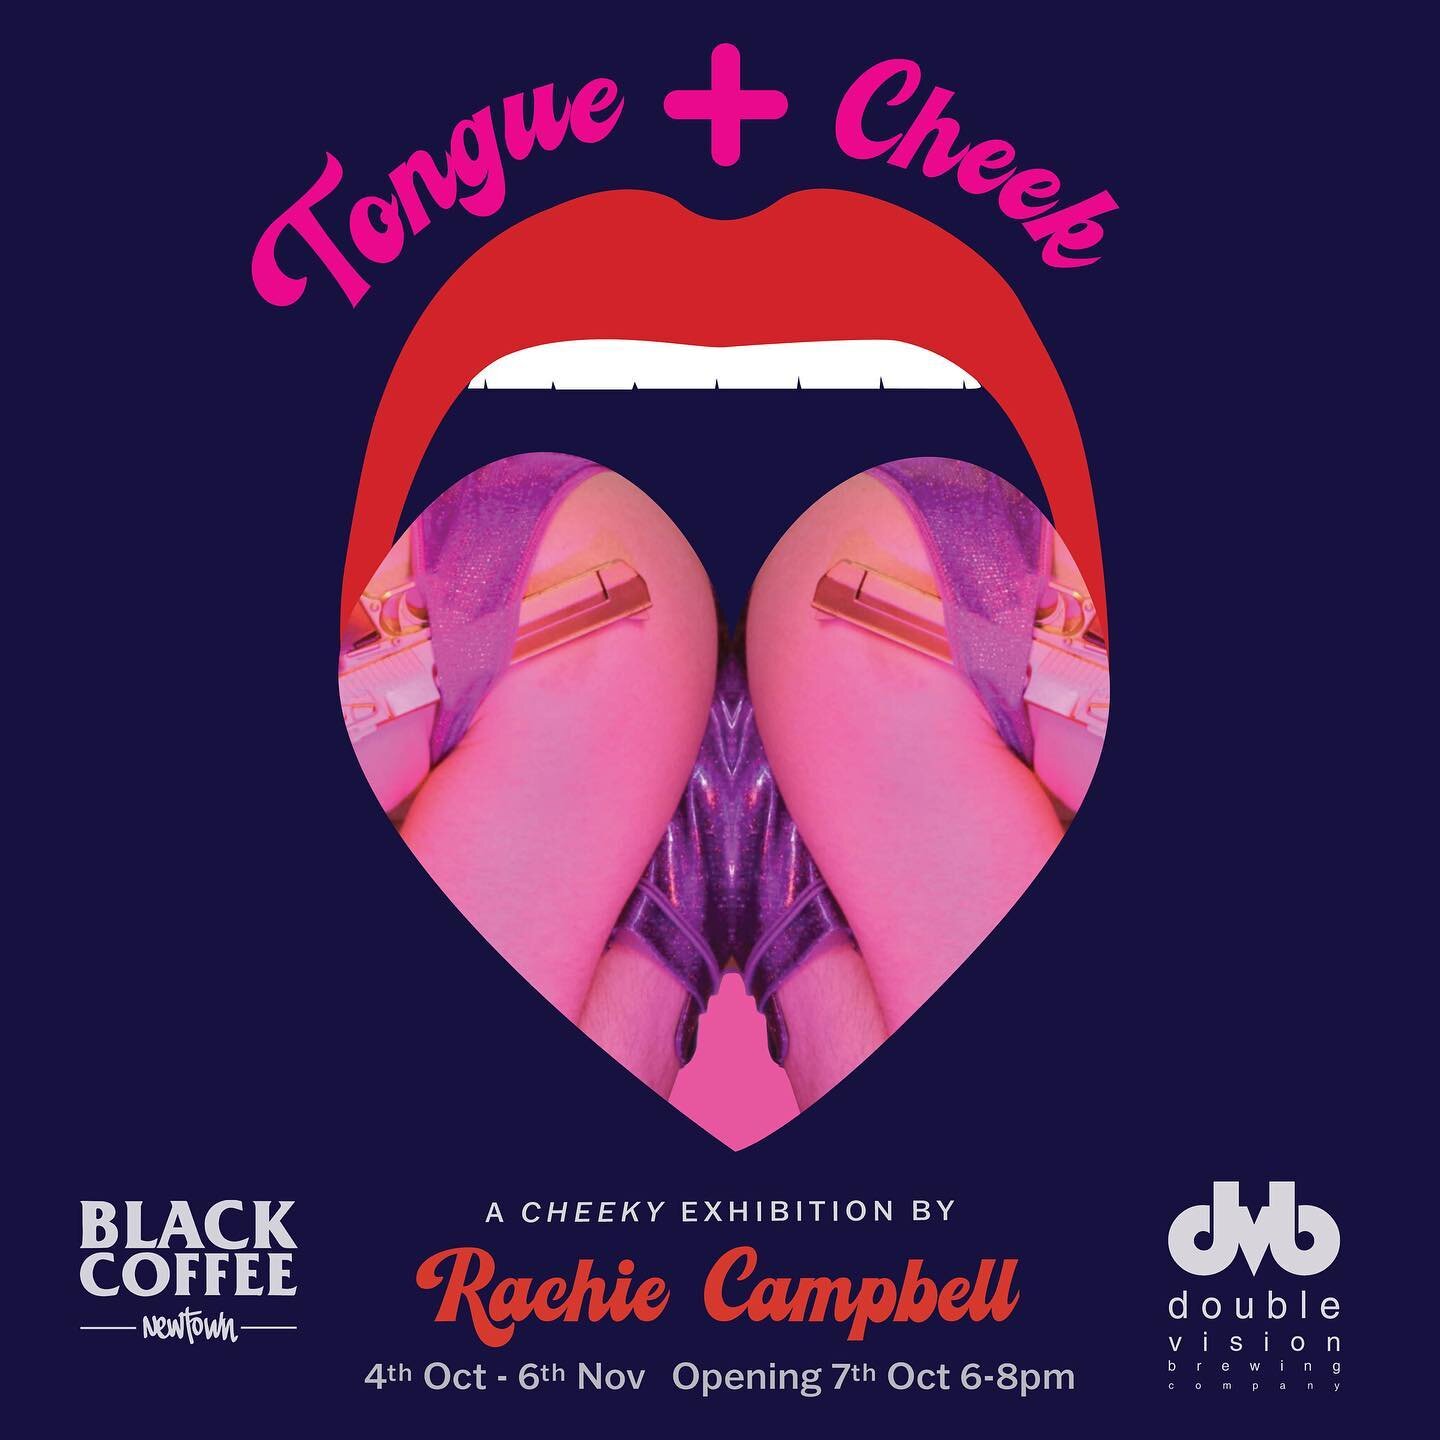 My cheeky solo Tongue + Cheek exhibition 
opens next week @blackcoffeenewtown 
will take you on a trip...  From oil paintings, playboys to moving image the exhibition is a colourful world wind of lips mania &amp; more&hellip;
. Swing by have a peek a